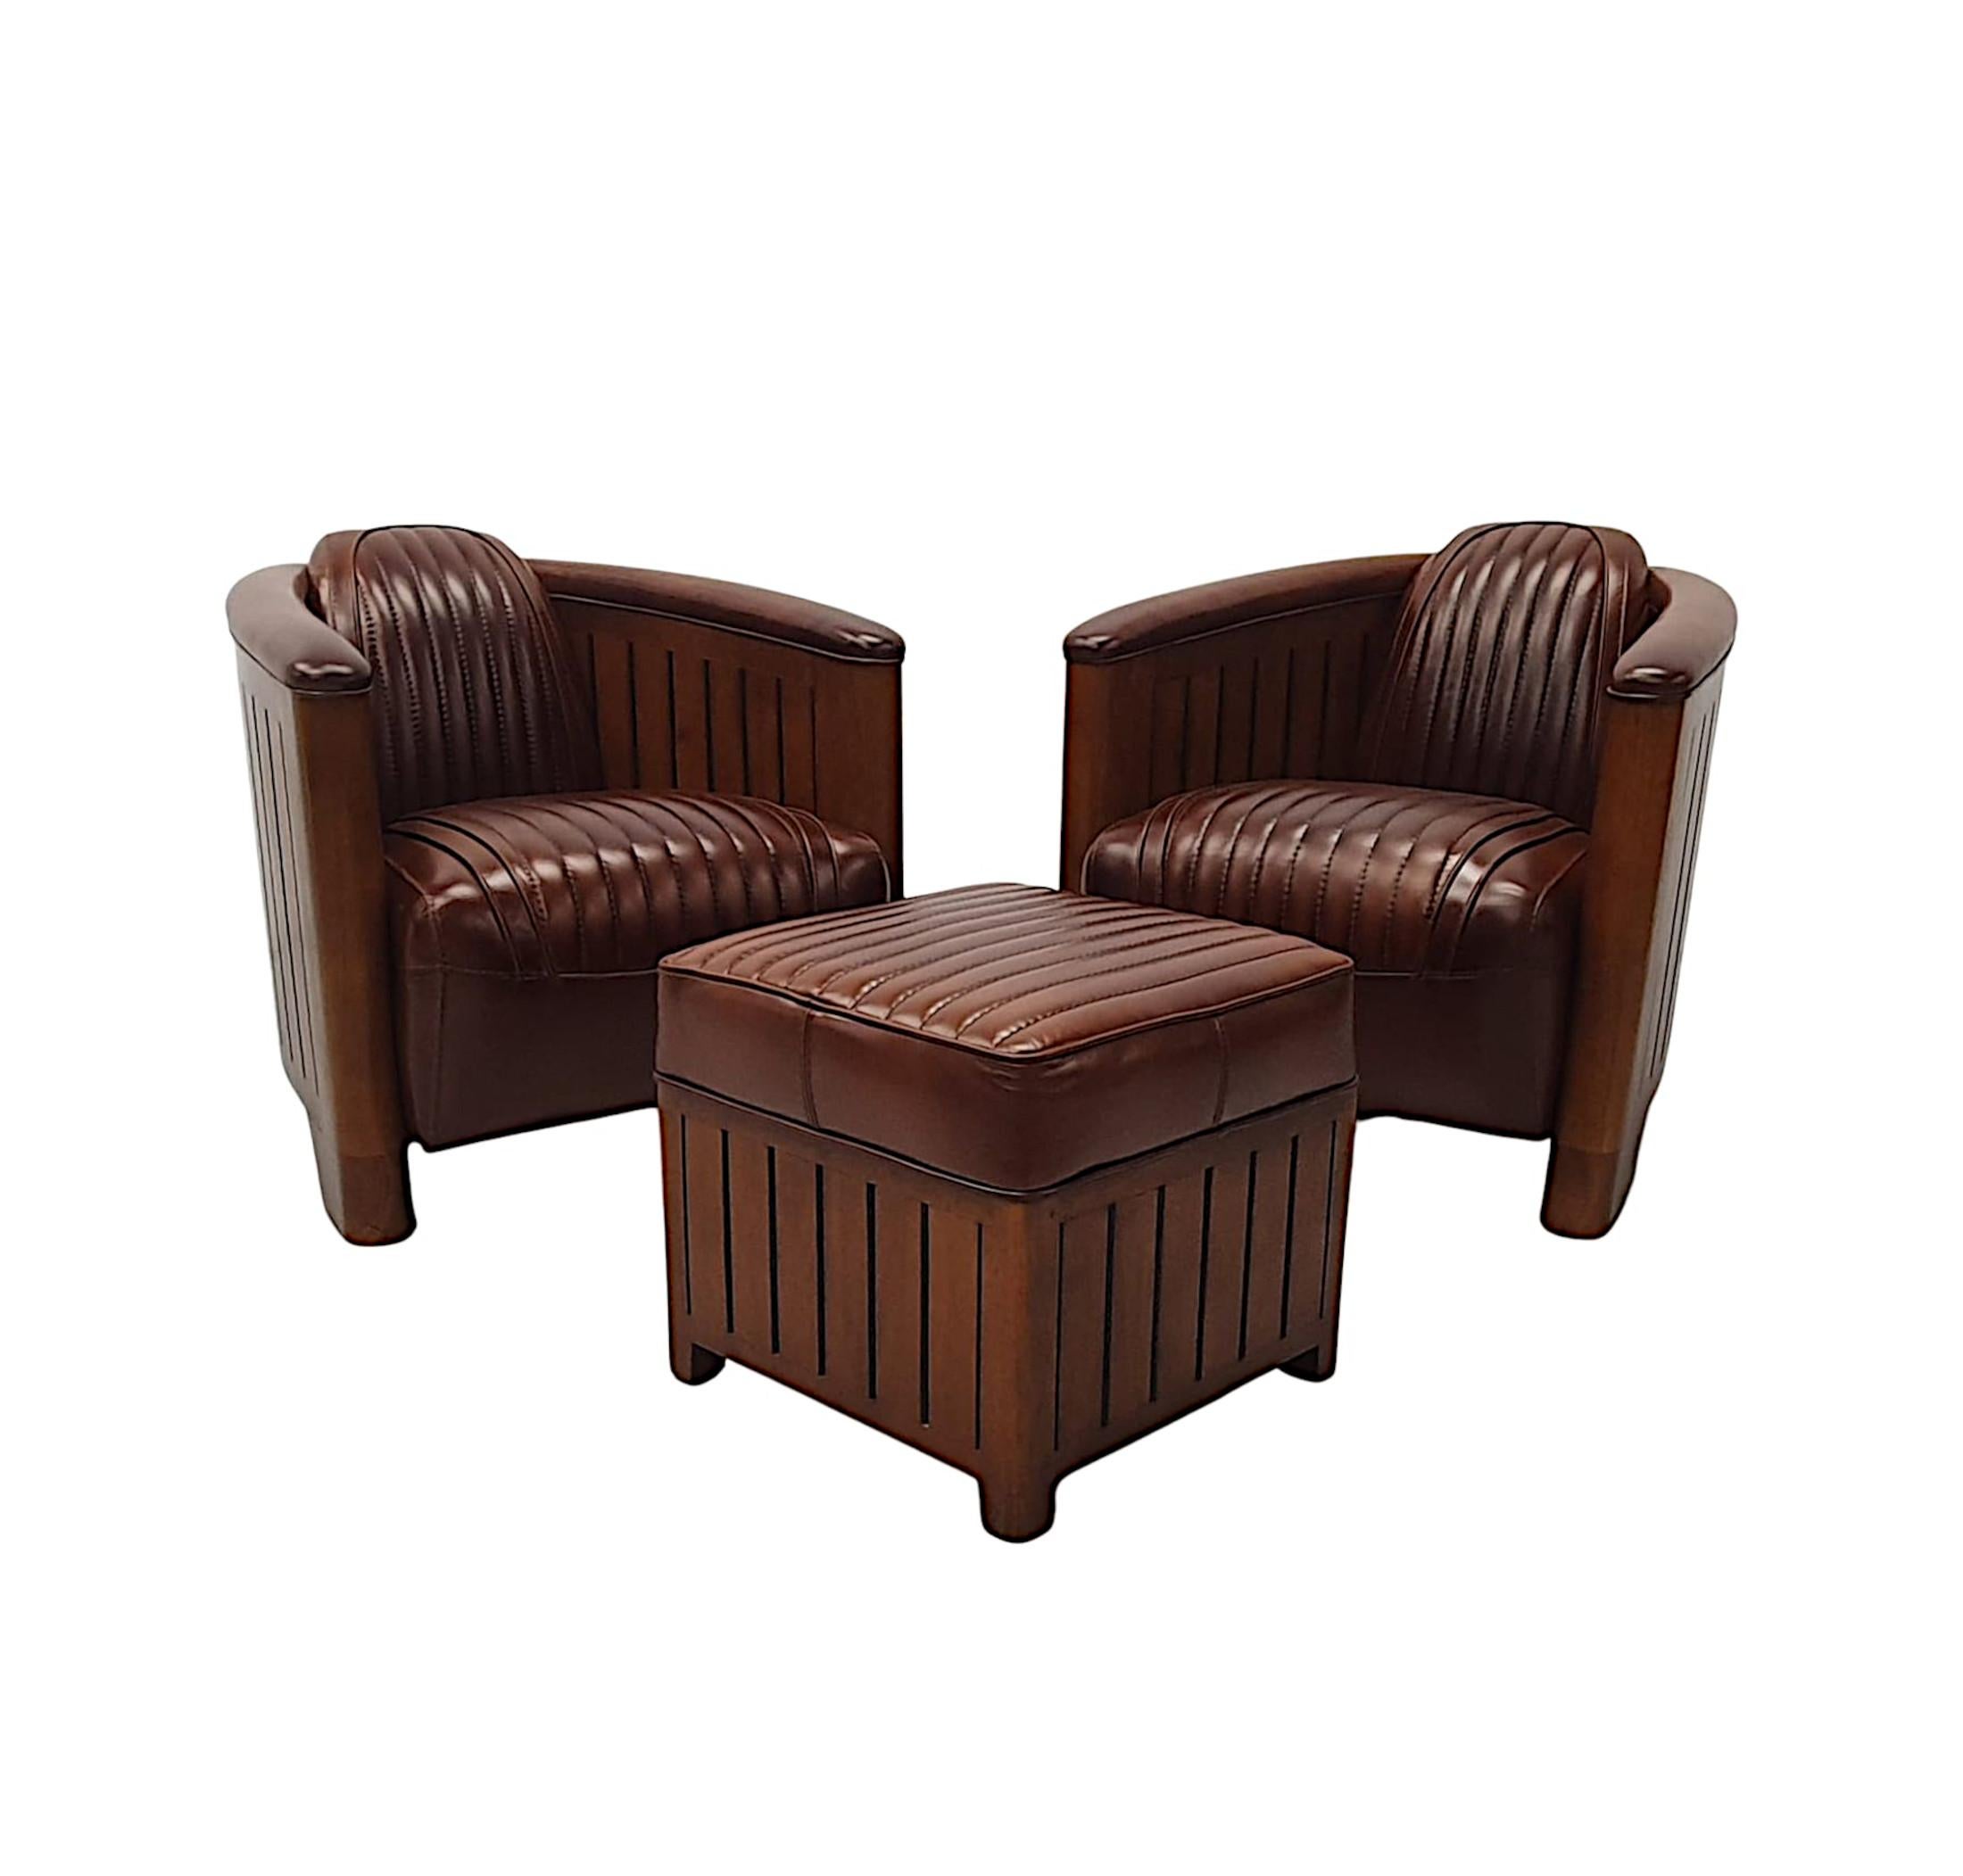 Contemporary A Stunning Club Armchair in the Art Deco Style